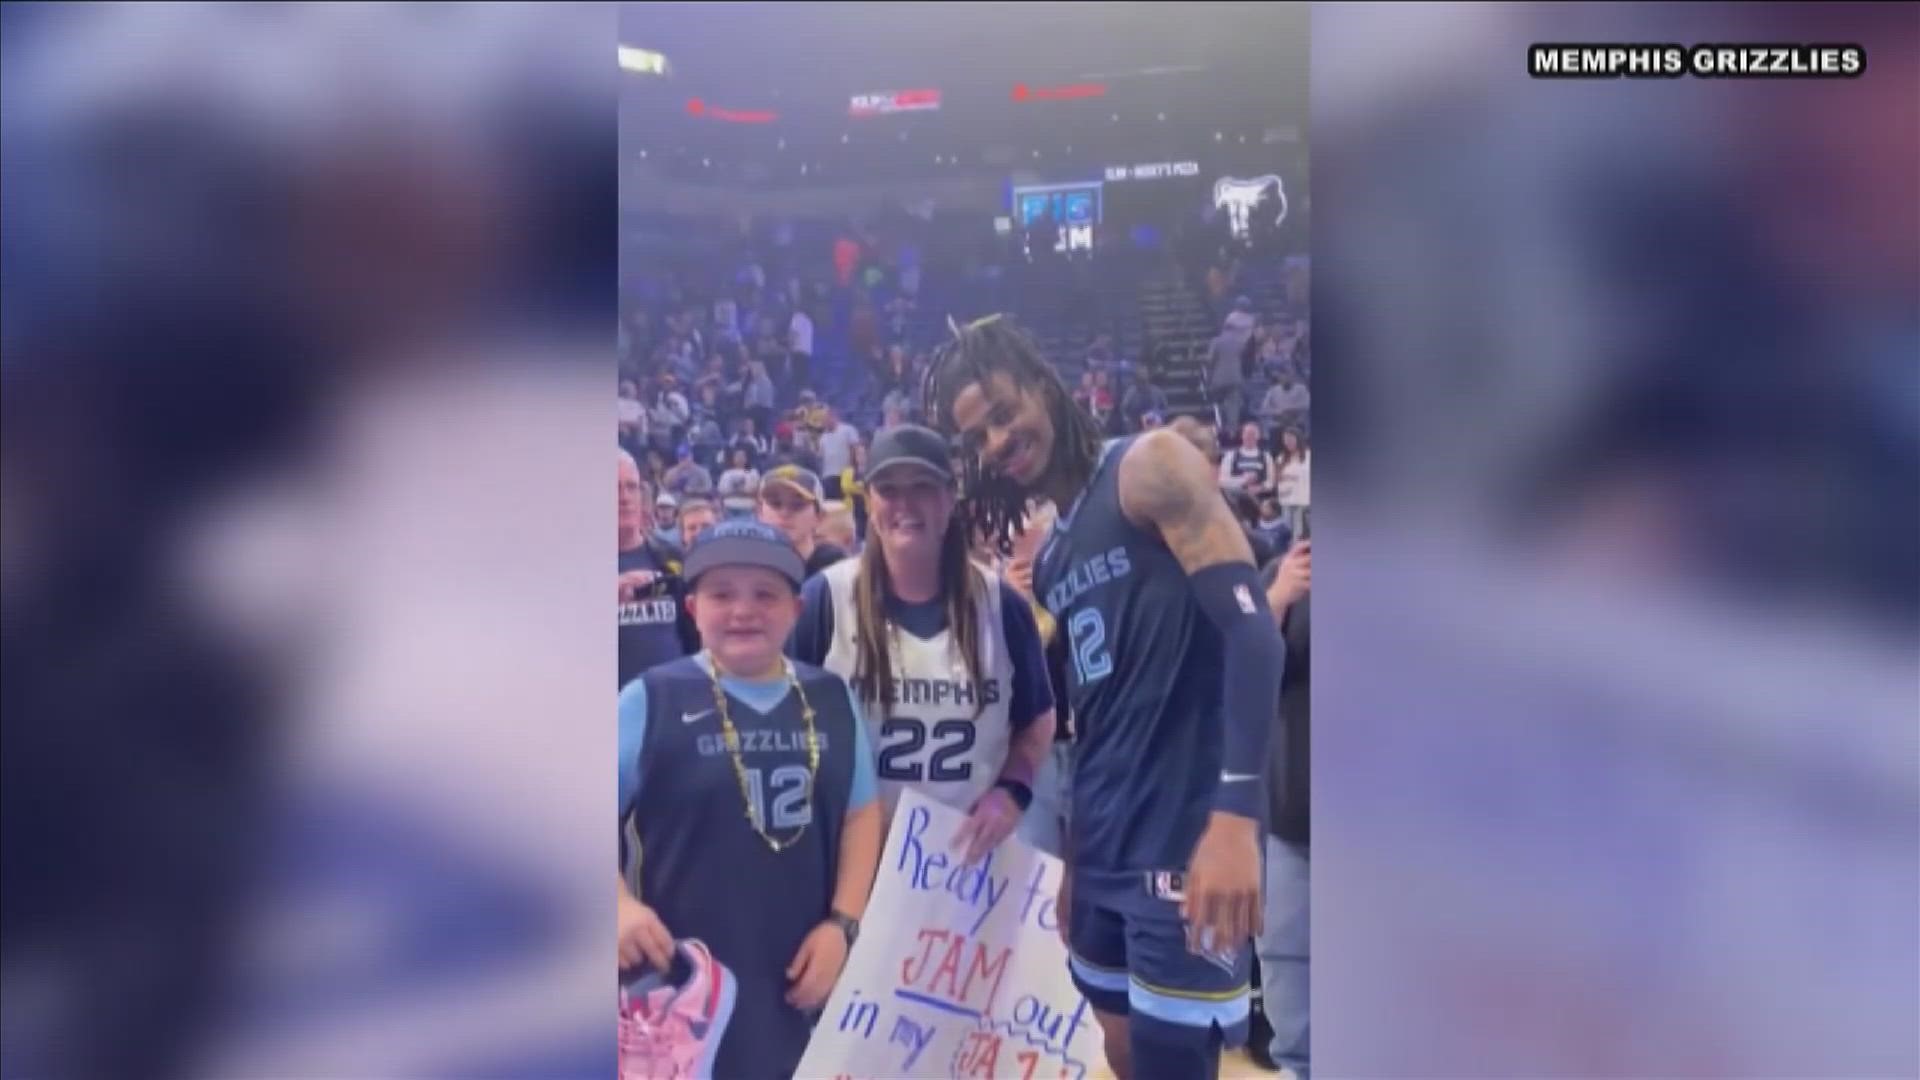 "We all make mistakes until we become the person that we're supposed to be," says fan Krissi Carr about Ja Morant and recent controversy with an Instagram livestream